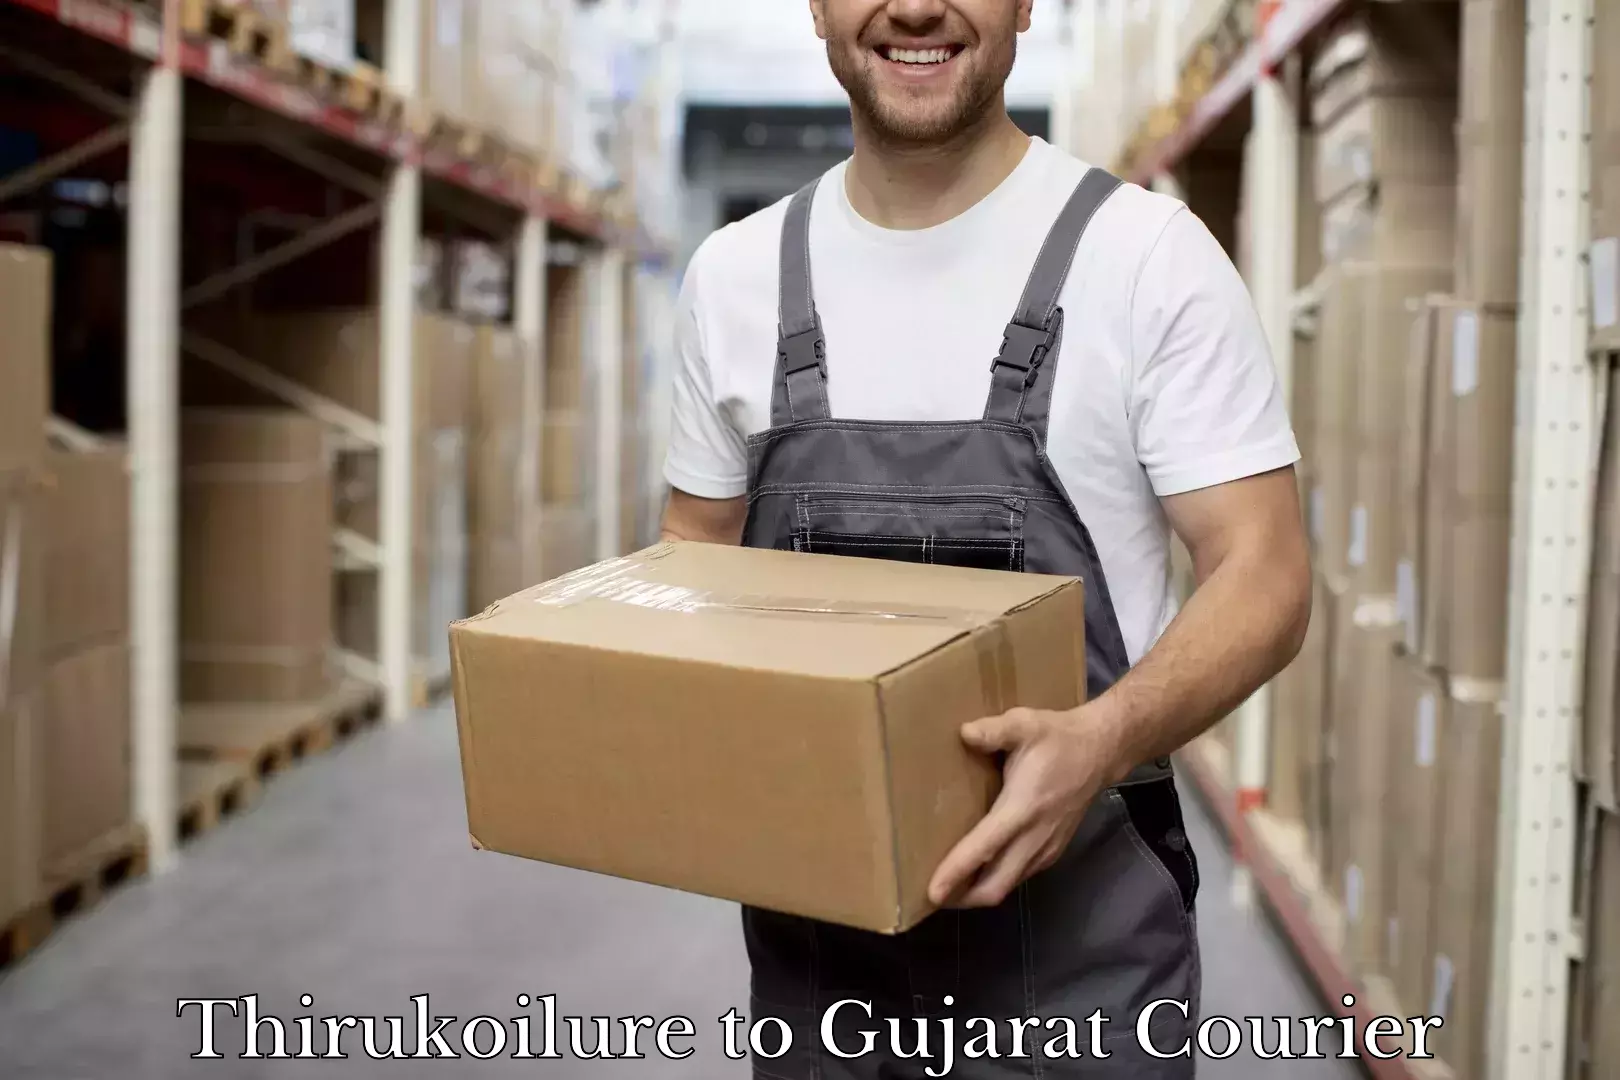 Reliable luggage courier Thirukoilure to Porbandar